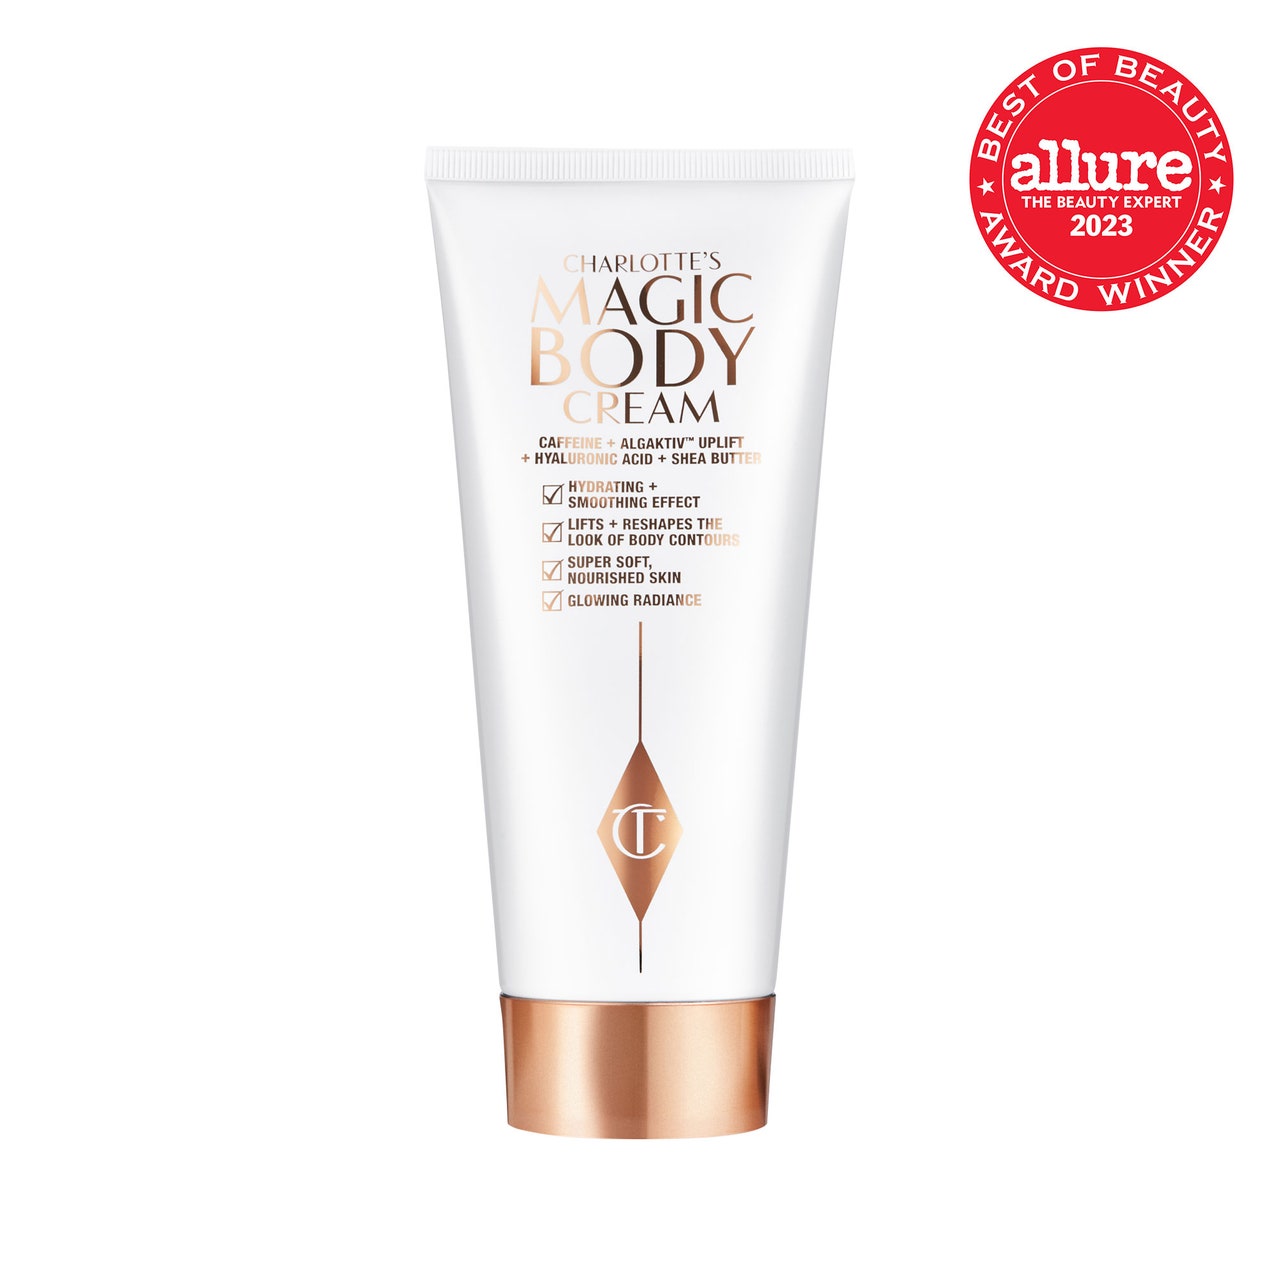 Charlotte Tilbury Magic Body Cream white tube with gold cap on white background with red Allure BoB seal in the top right corner